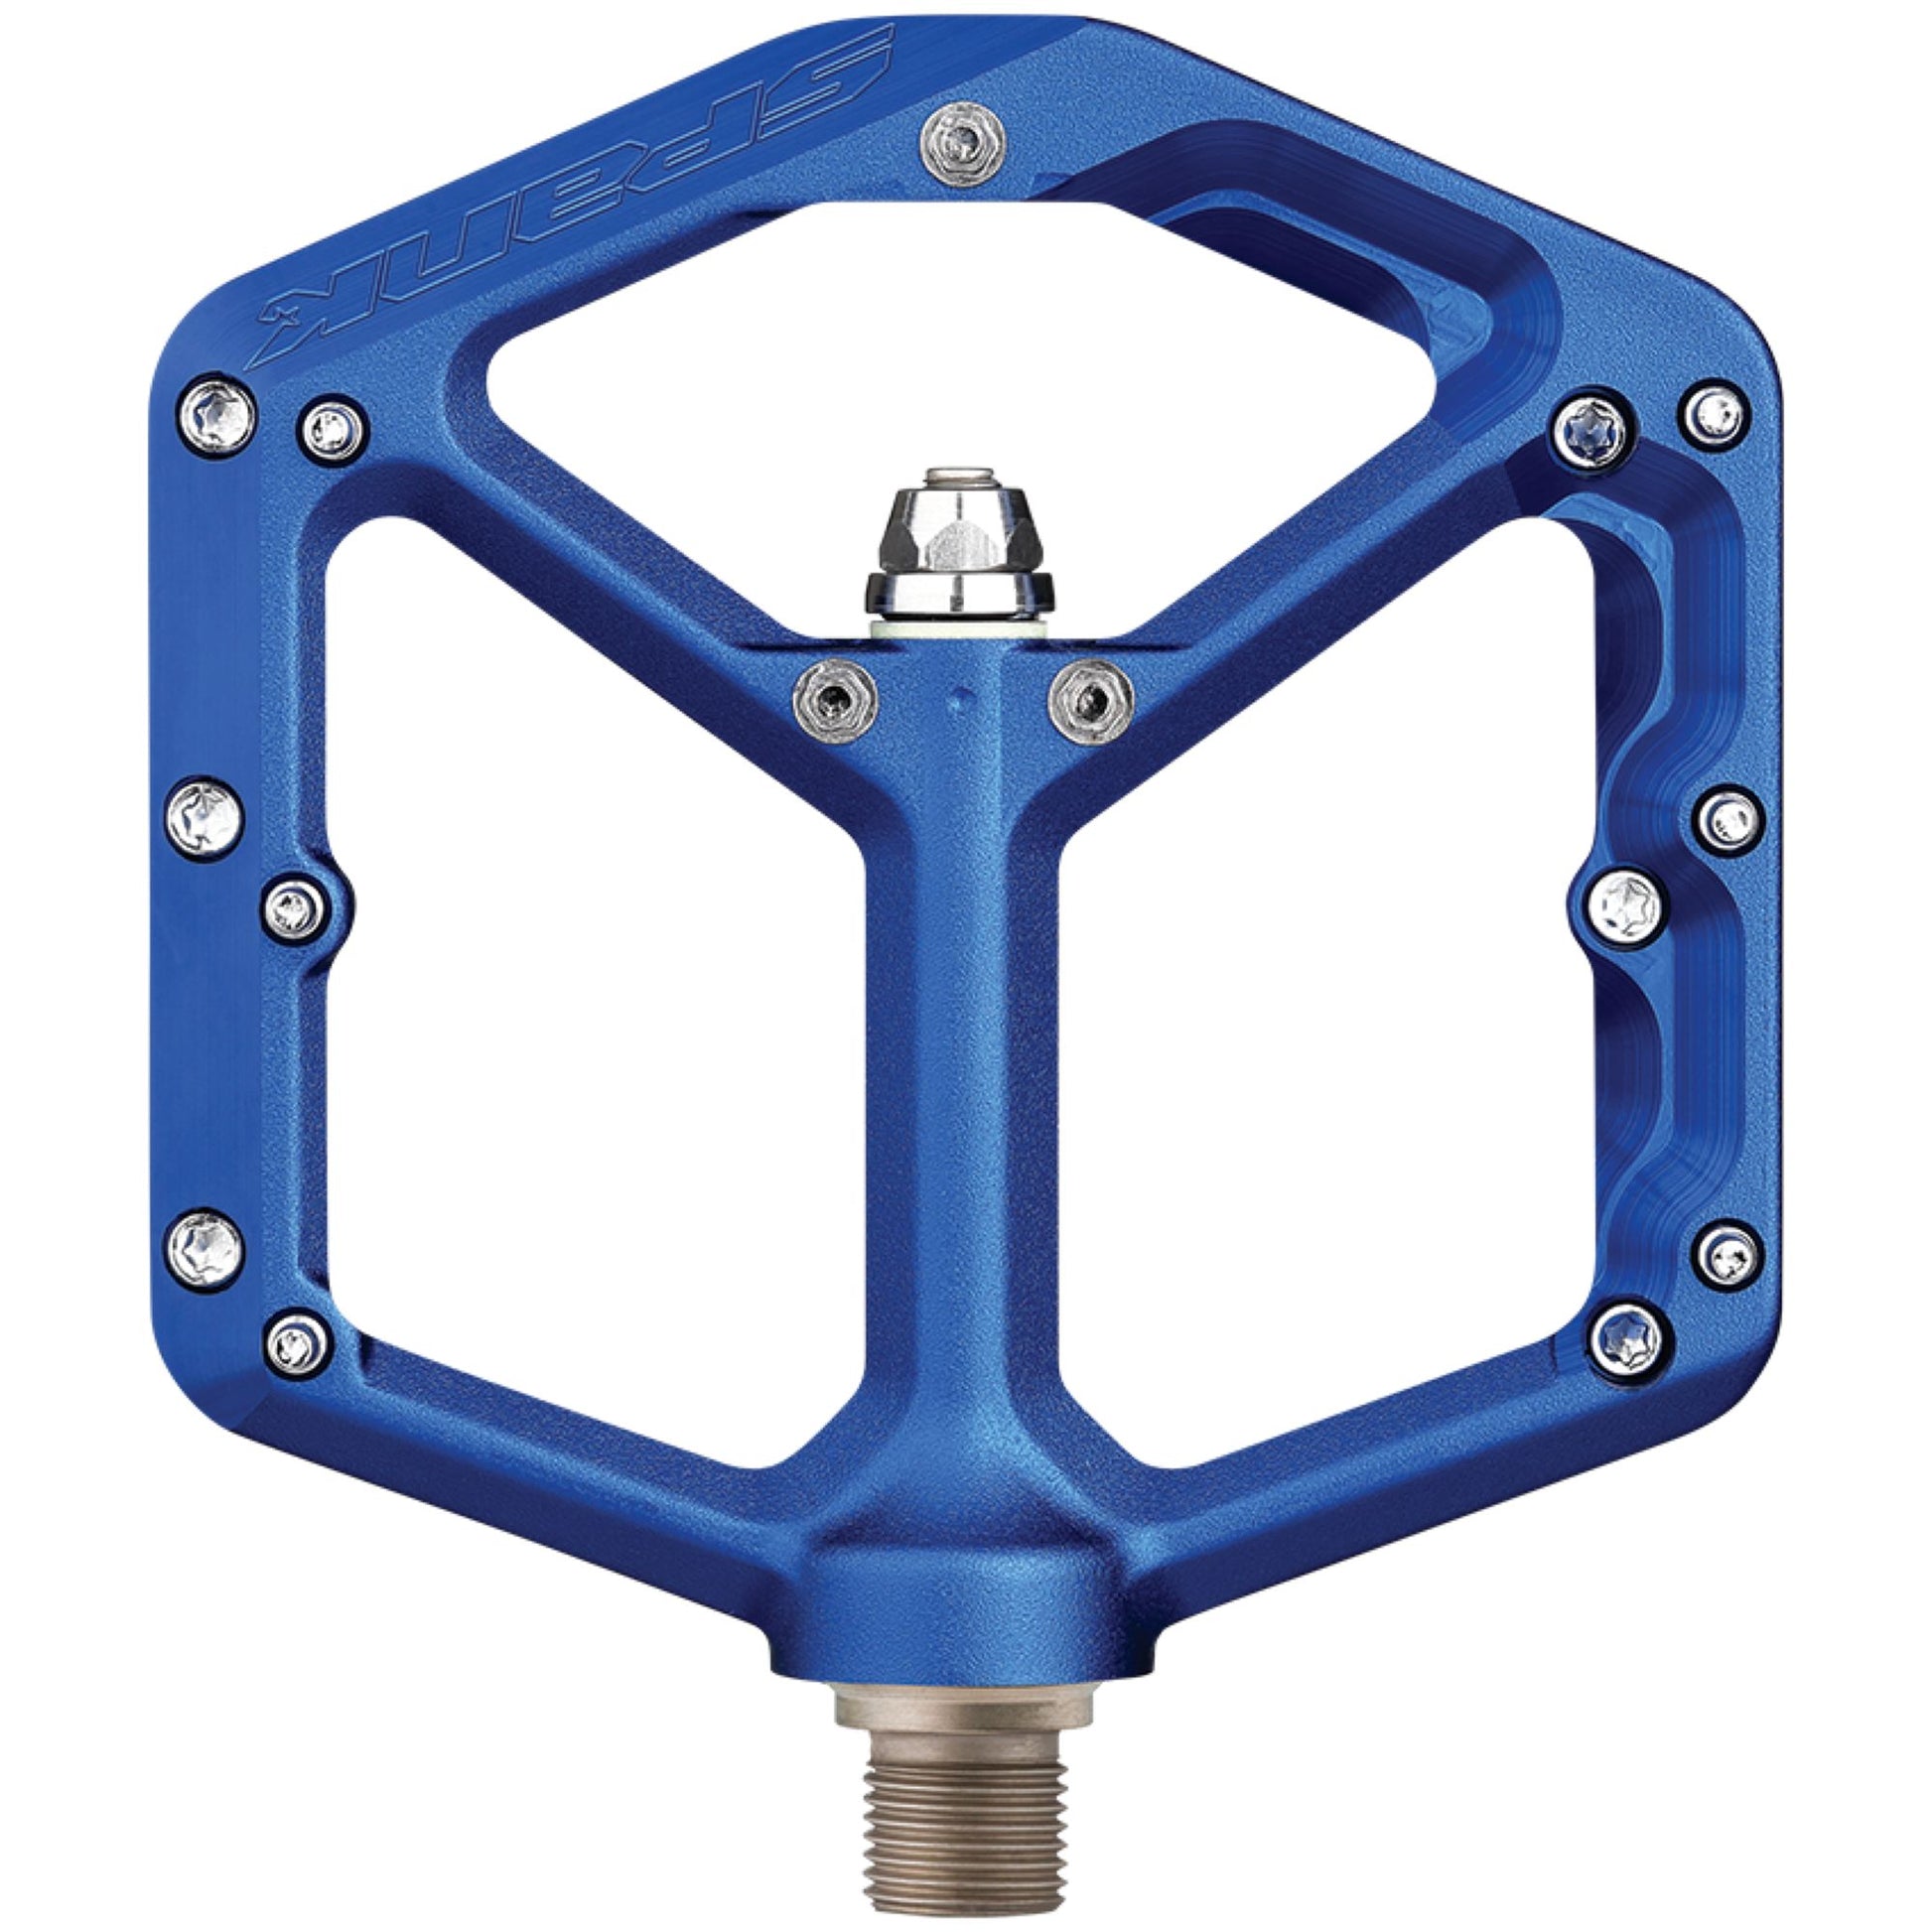 Spank Oozy Reboot Pedals Blue 100x100mm Pedals